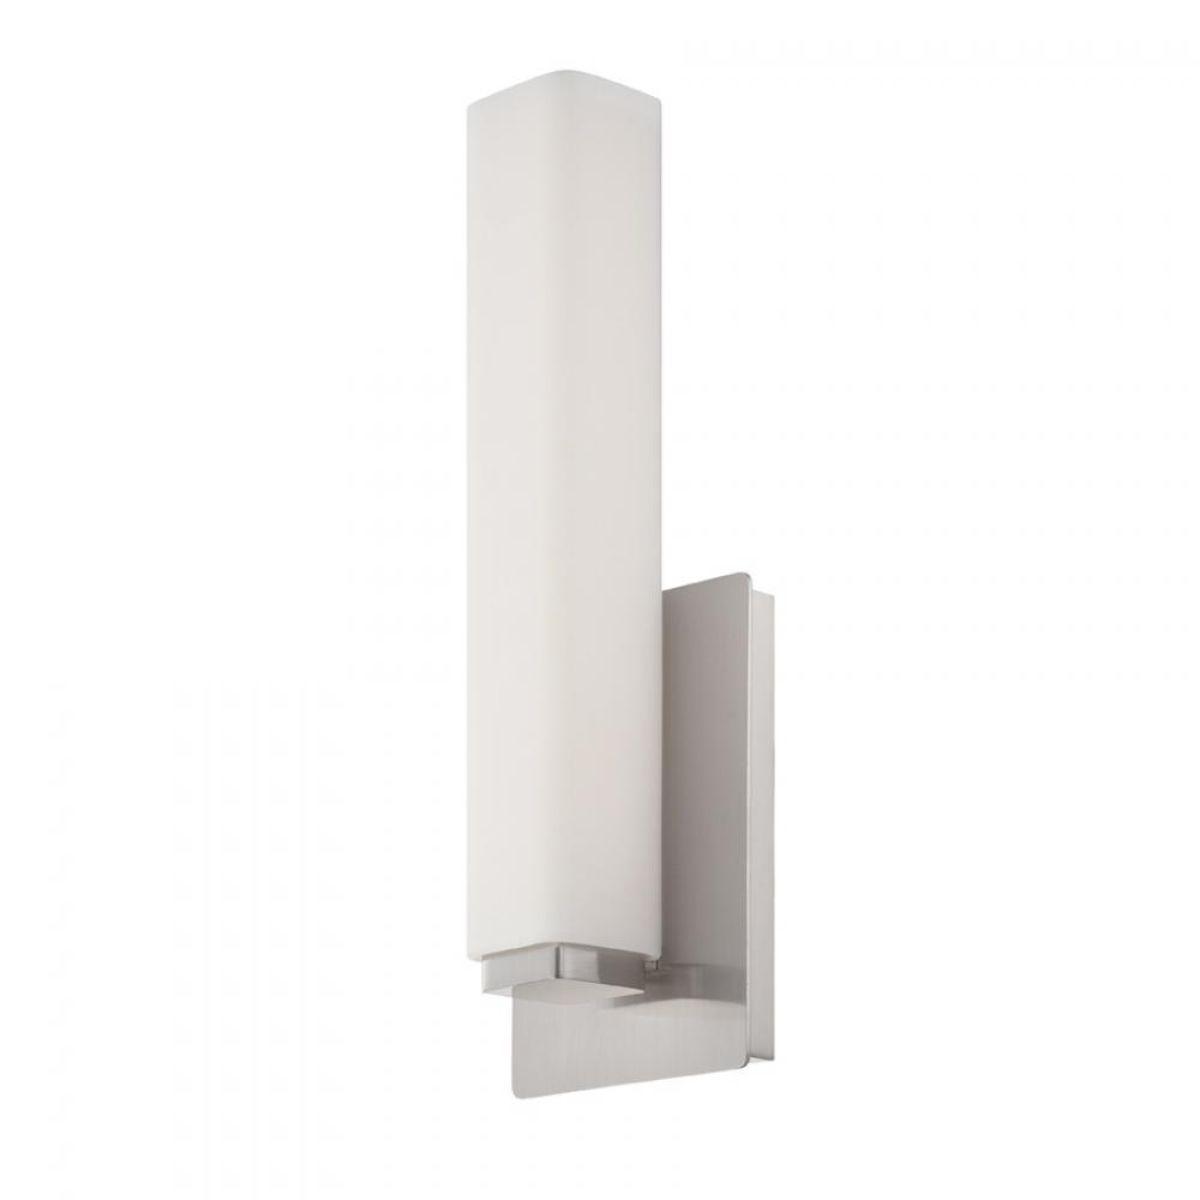 Vogue 15 in. LED Armed Sconce